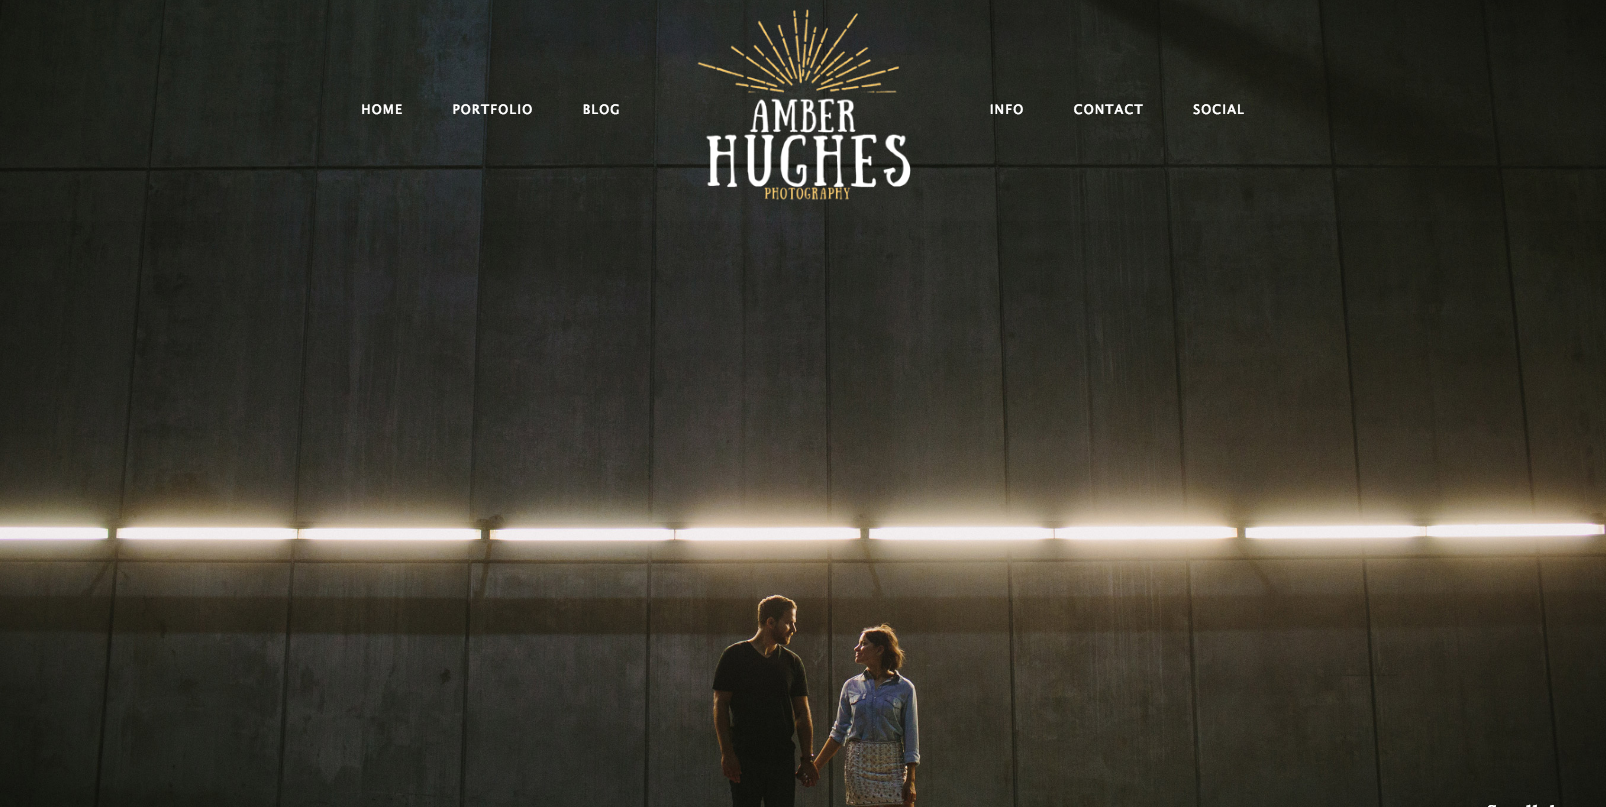 Amber Hughes Photography New Website